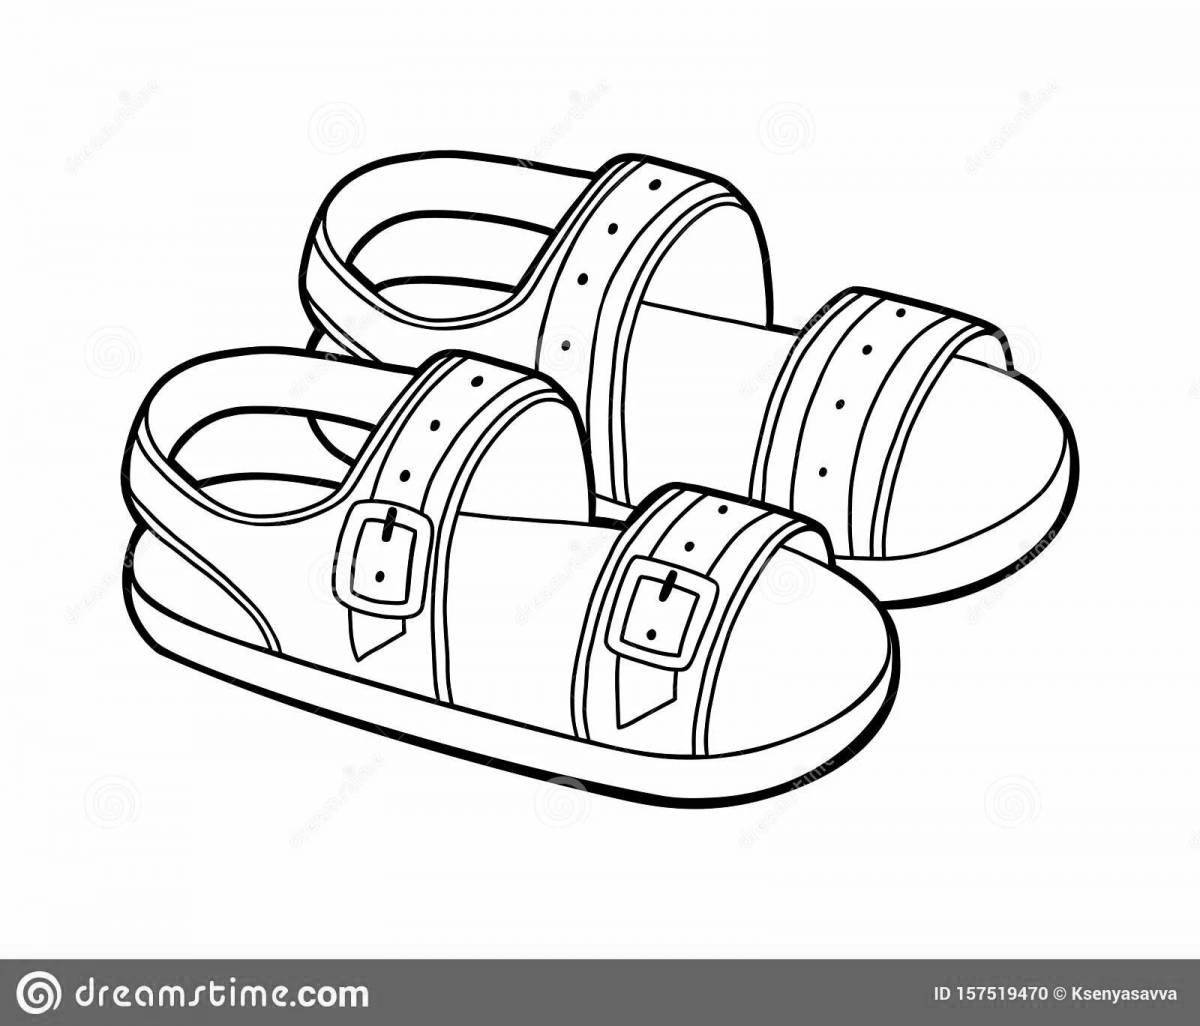 Outstanding shoe coloring page for 4-5 year olds